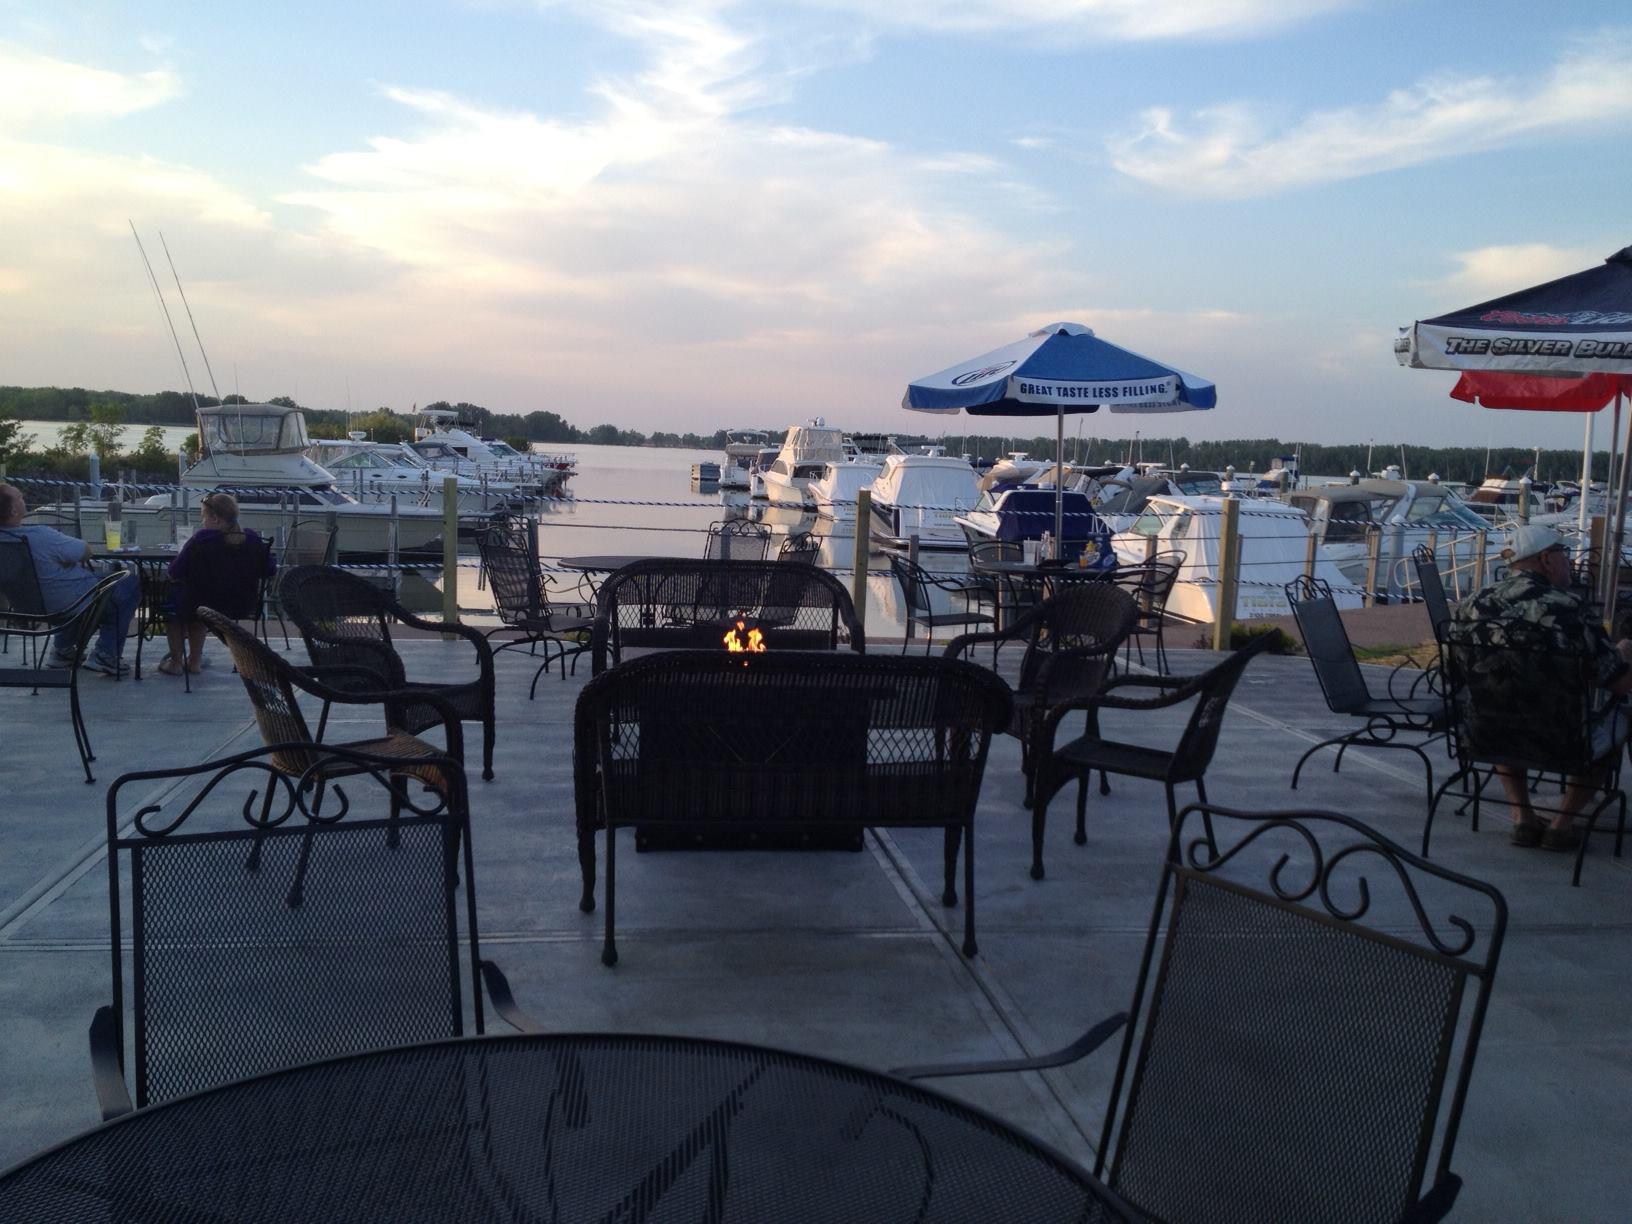 Looking for waterfront dining where the food is as good as the view? Cleats Club Seat Grille Marblehead is a restaurant and bar that attracts diners from all across Ohio. Overlooking the East Harbor Marina, we are a tourist destination where the locals also like to hang out year-round.

Touted as “home of the world’s best wings,” we are known for our award-winning wings. With more than two dozen sauces, including some unique flavors like Erie Island Smoke, Six Pepper and Mojito Lime, the cleats wings are menu staples. Not your typical bar food, we also feature homestyle pizza, burgers, overstuffed sandwiches, shareable appetizers and a Friday fish fry.